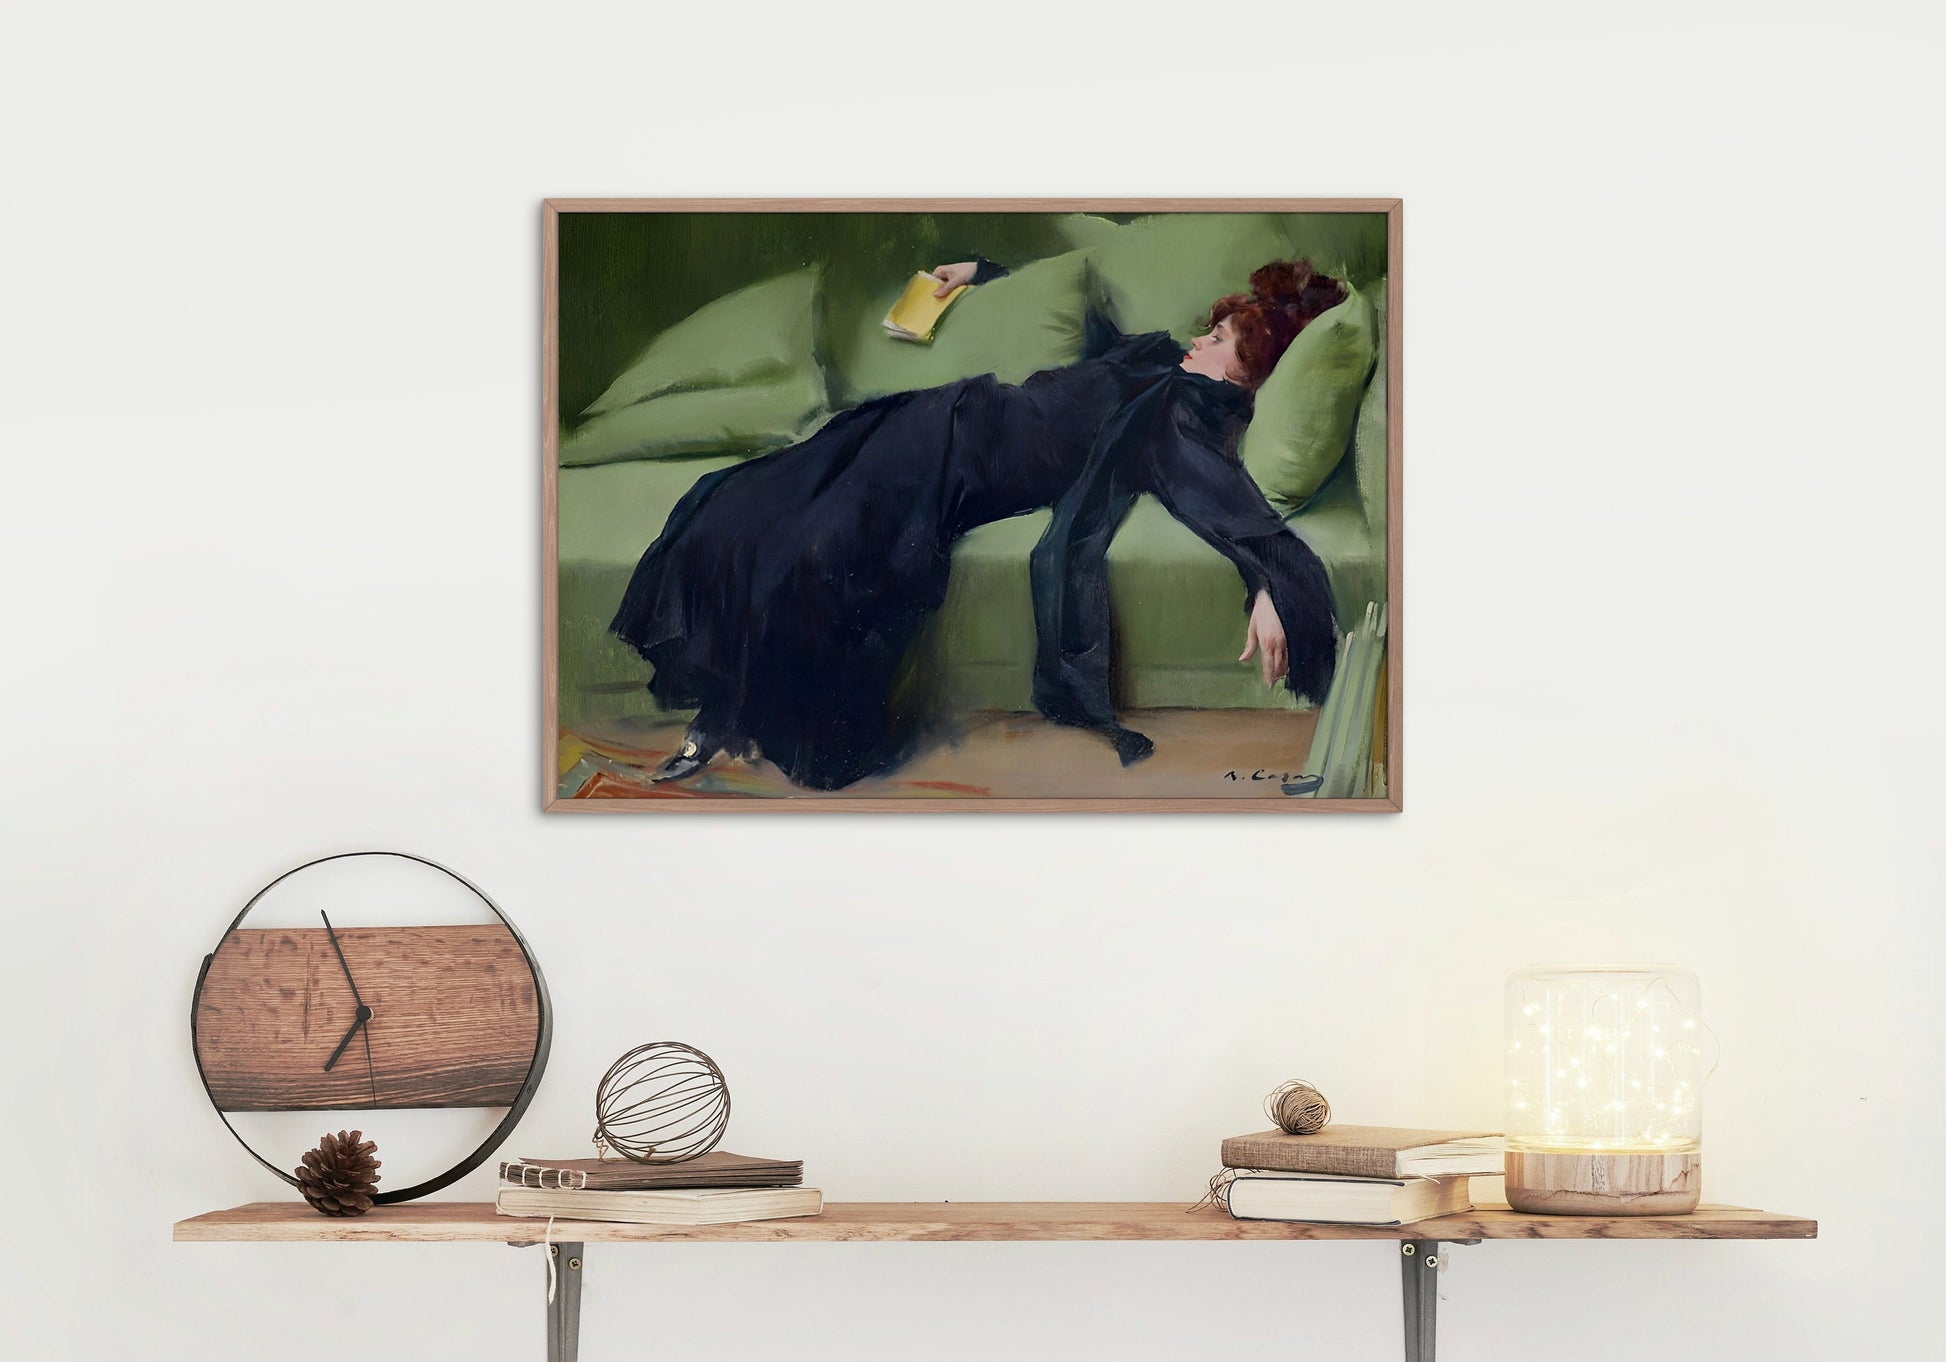 Decadent young woman After the dance DIGITAL PRINT, Ramon Casas, Victorian artwork, Moody vintage portrait painting, Victorian lady print